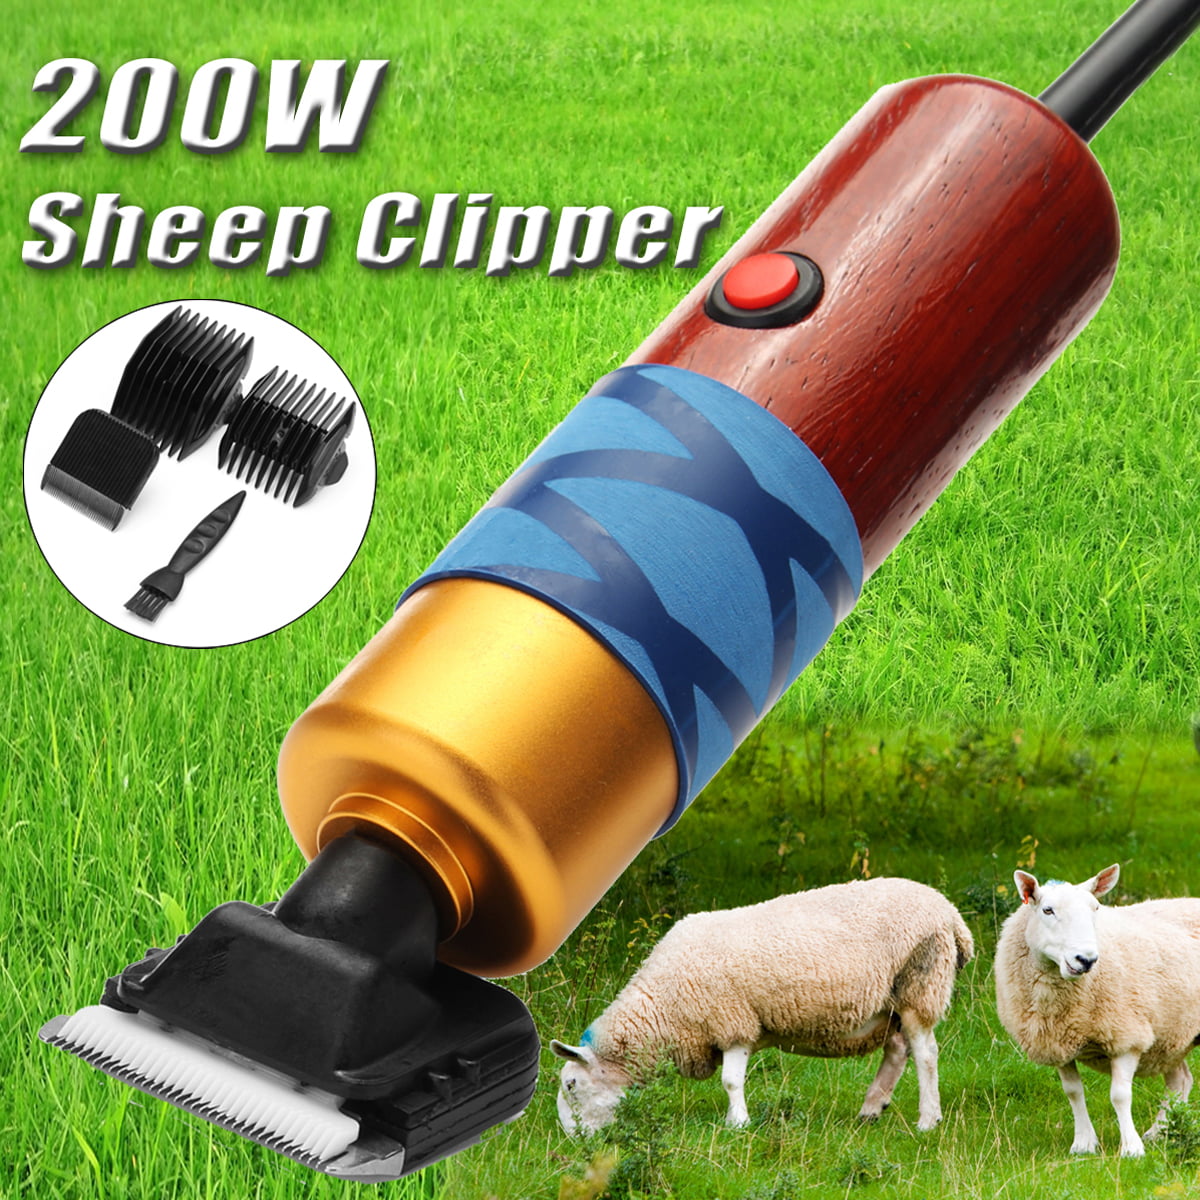 STHfficial 200w Electric Shearing Horse Sheep Shear Animal Pet Grooming Clipper Trimmer Clipper Hair Cutting